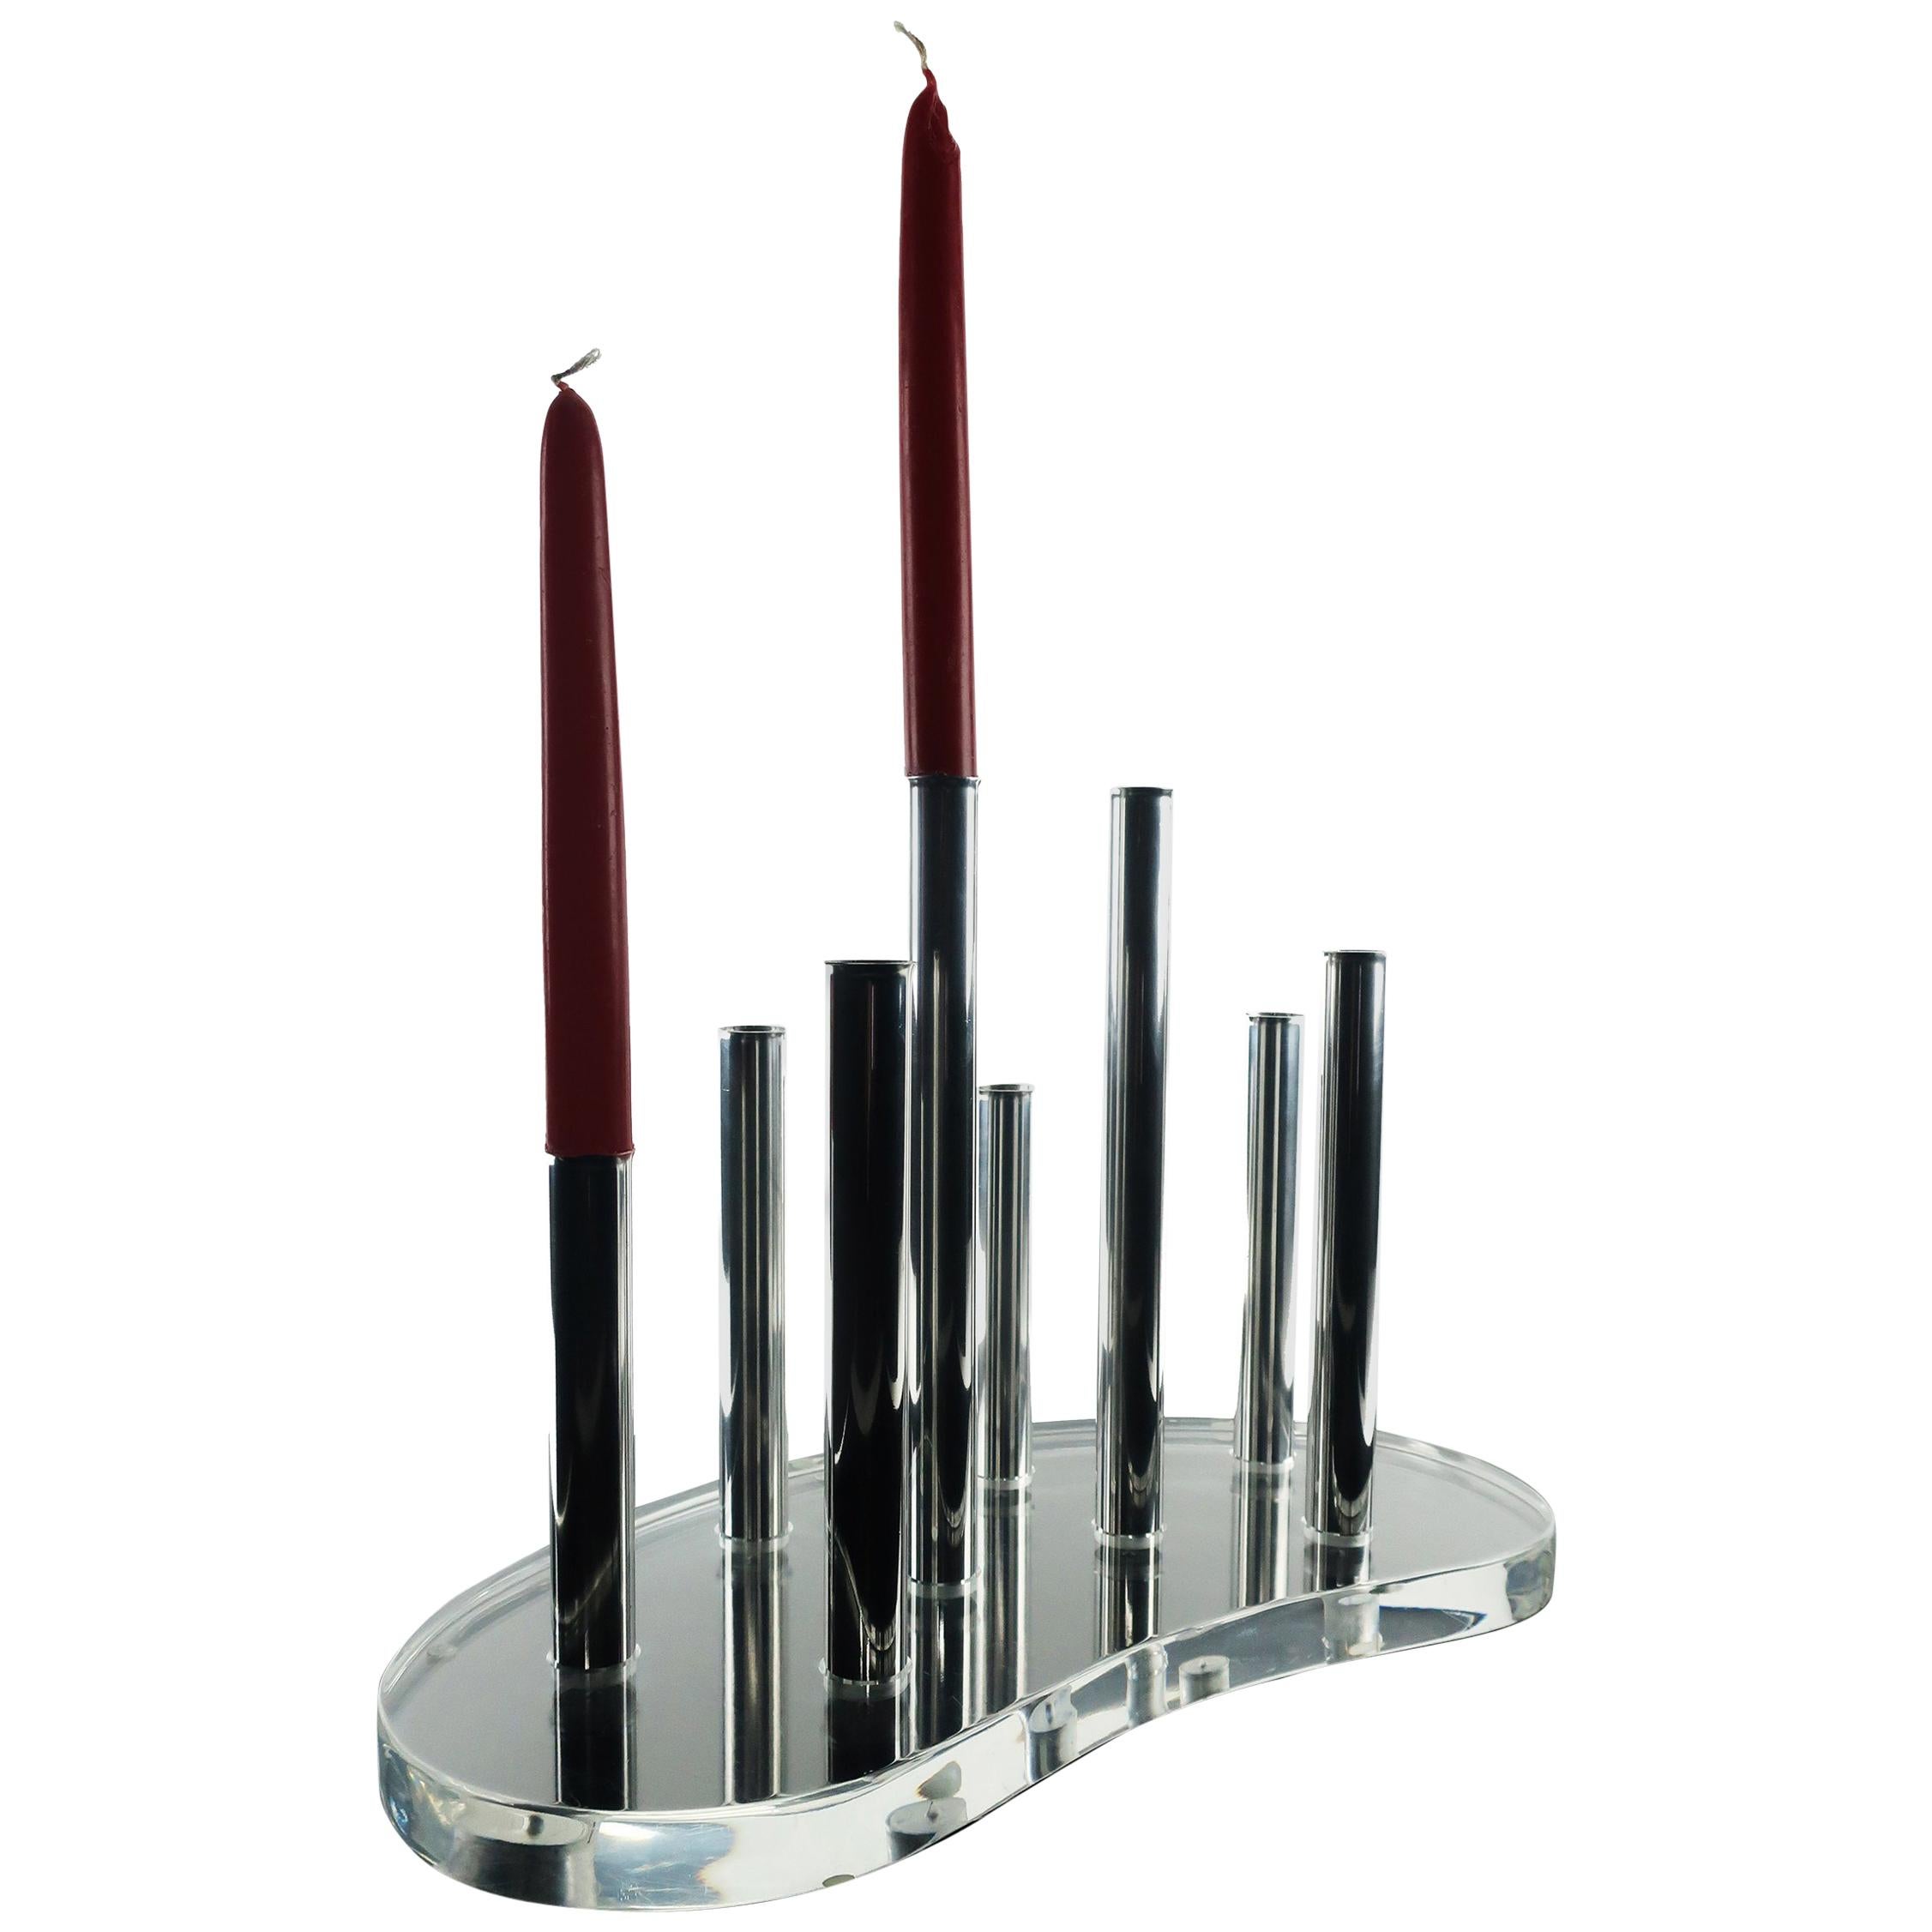 Vintage Lucite and Aluminum Candleholder For Sale